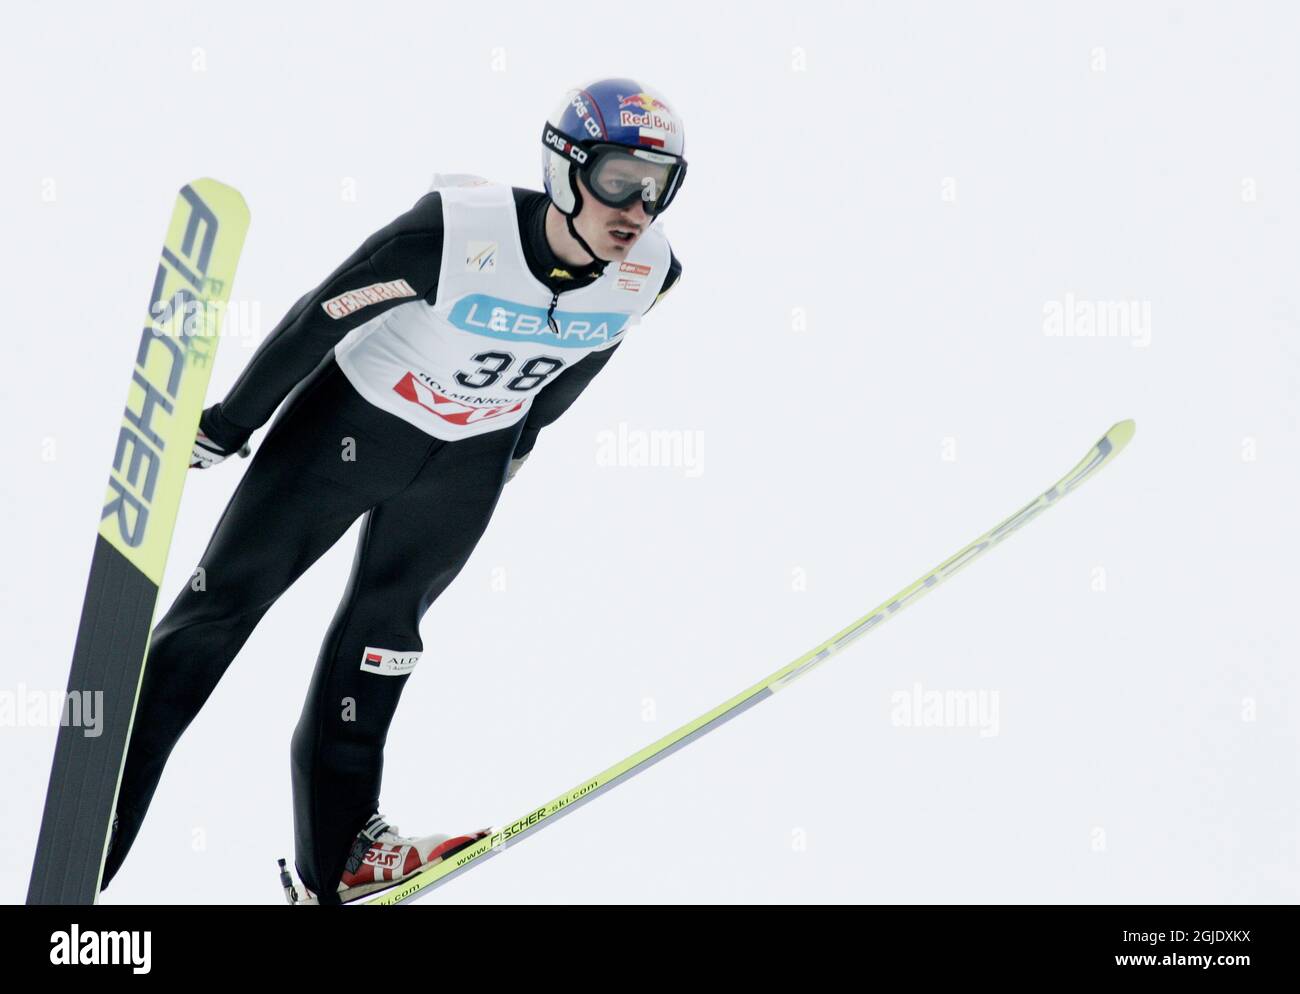 Adam Malysc from Poland placed 11 at the World Cup ski jumping competition at Holmenkollen Oslo. Stock Photo